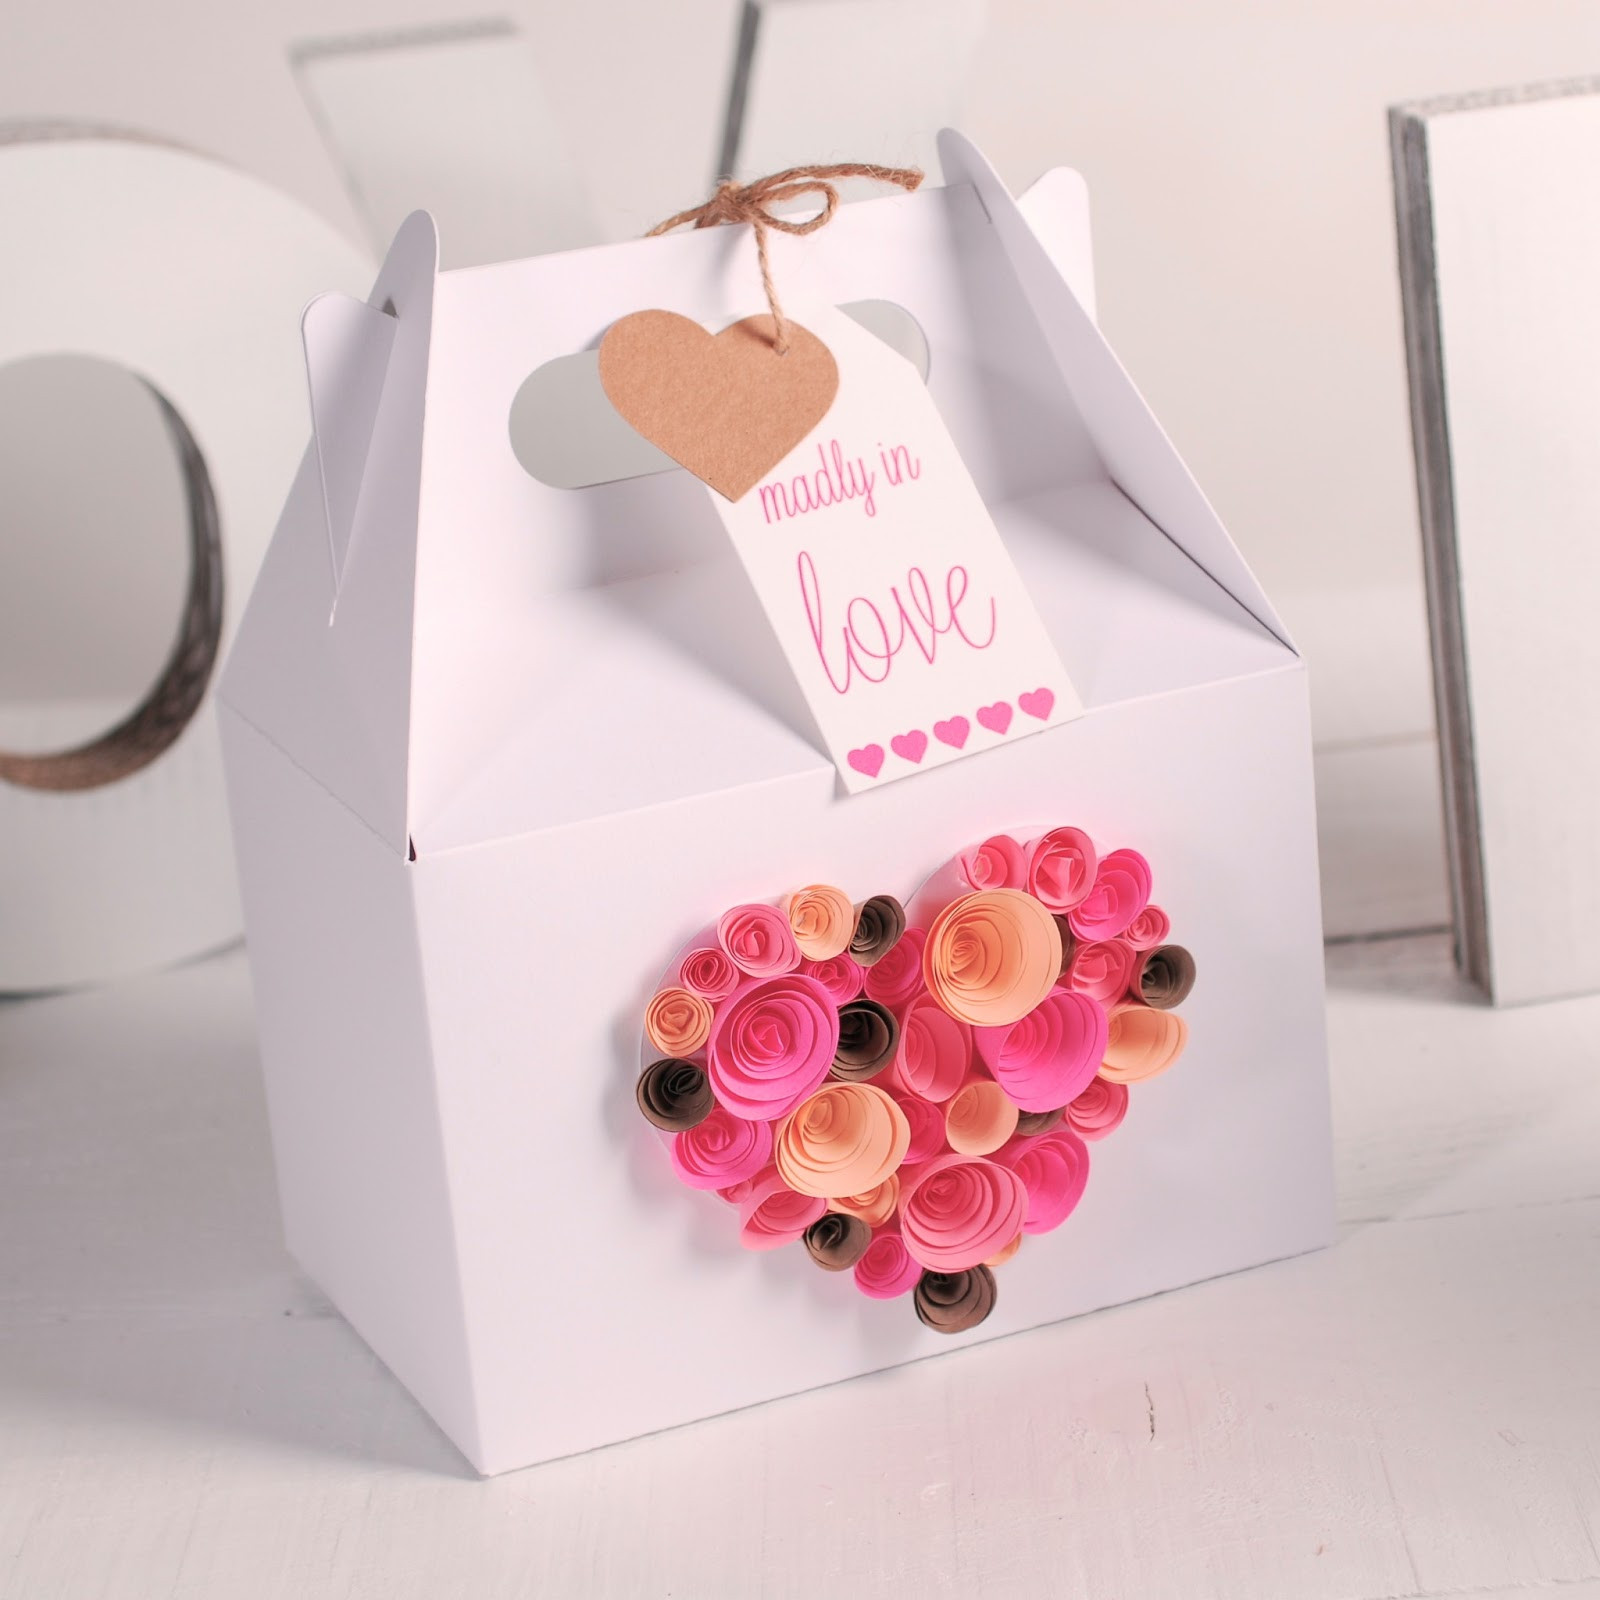 Valentines Day Gift Wrapping Ideas
 Gift wrapping ideas for Valentines Day How to decorate a